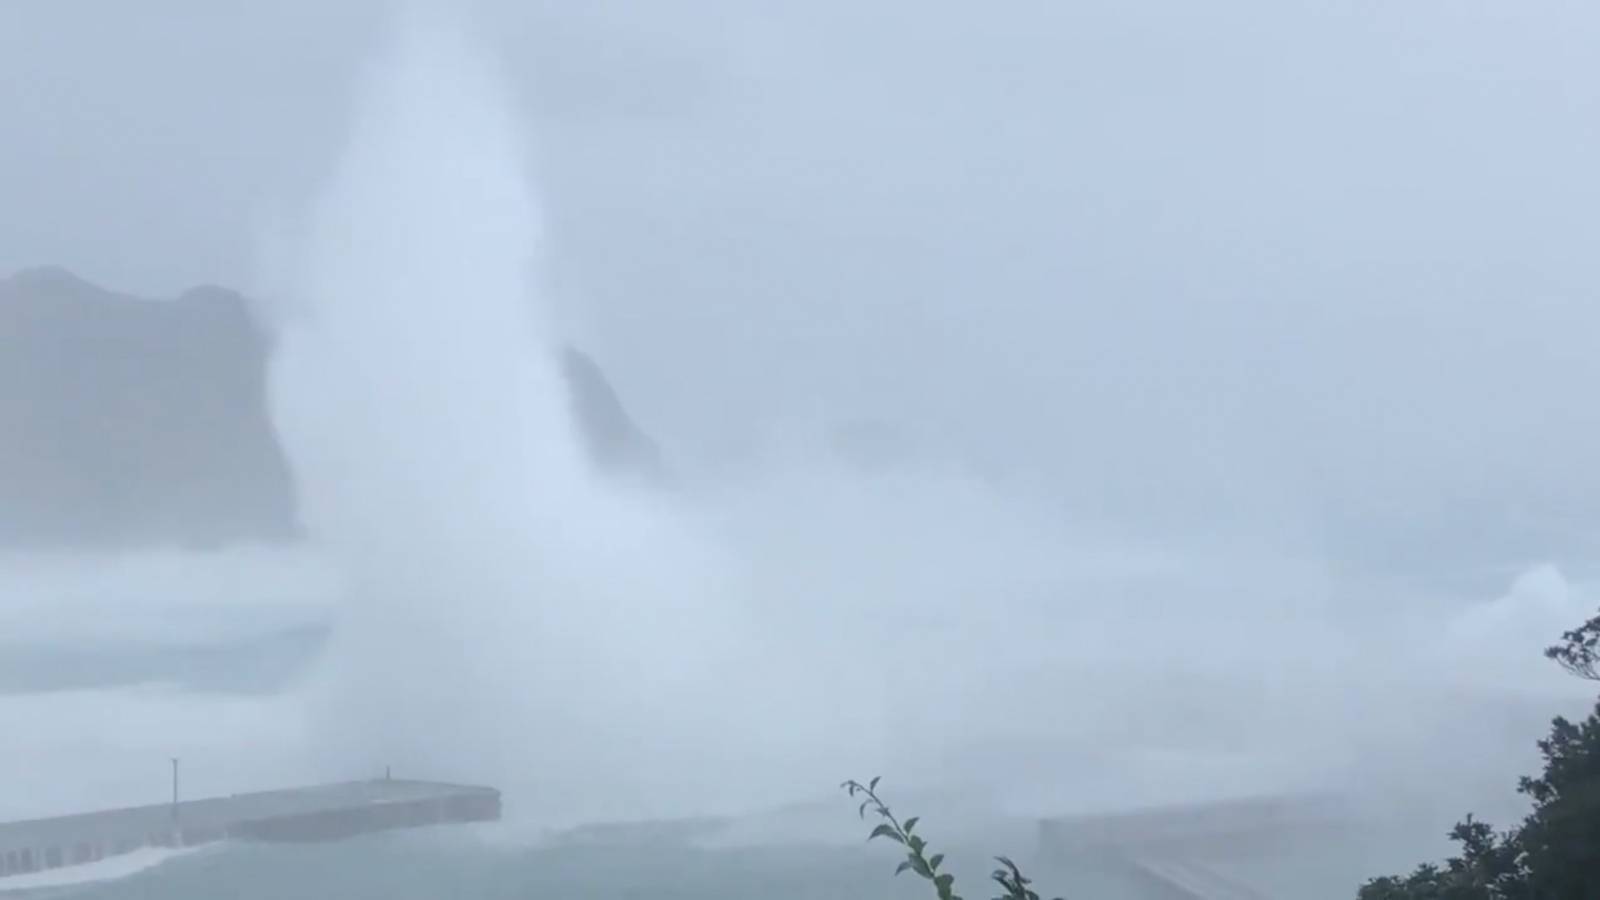 A massive wave pushed by winds is seen during Typhoon Hagibis in Kozu Island